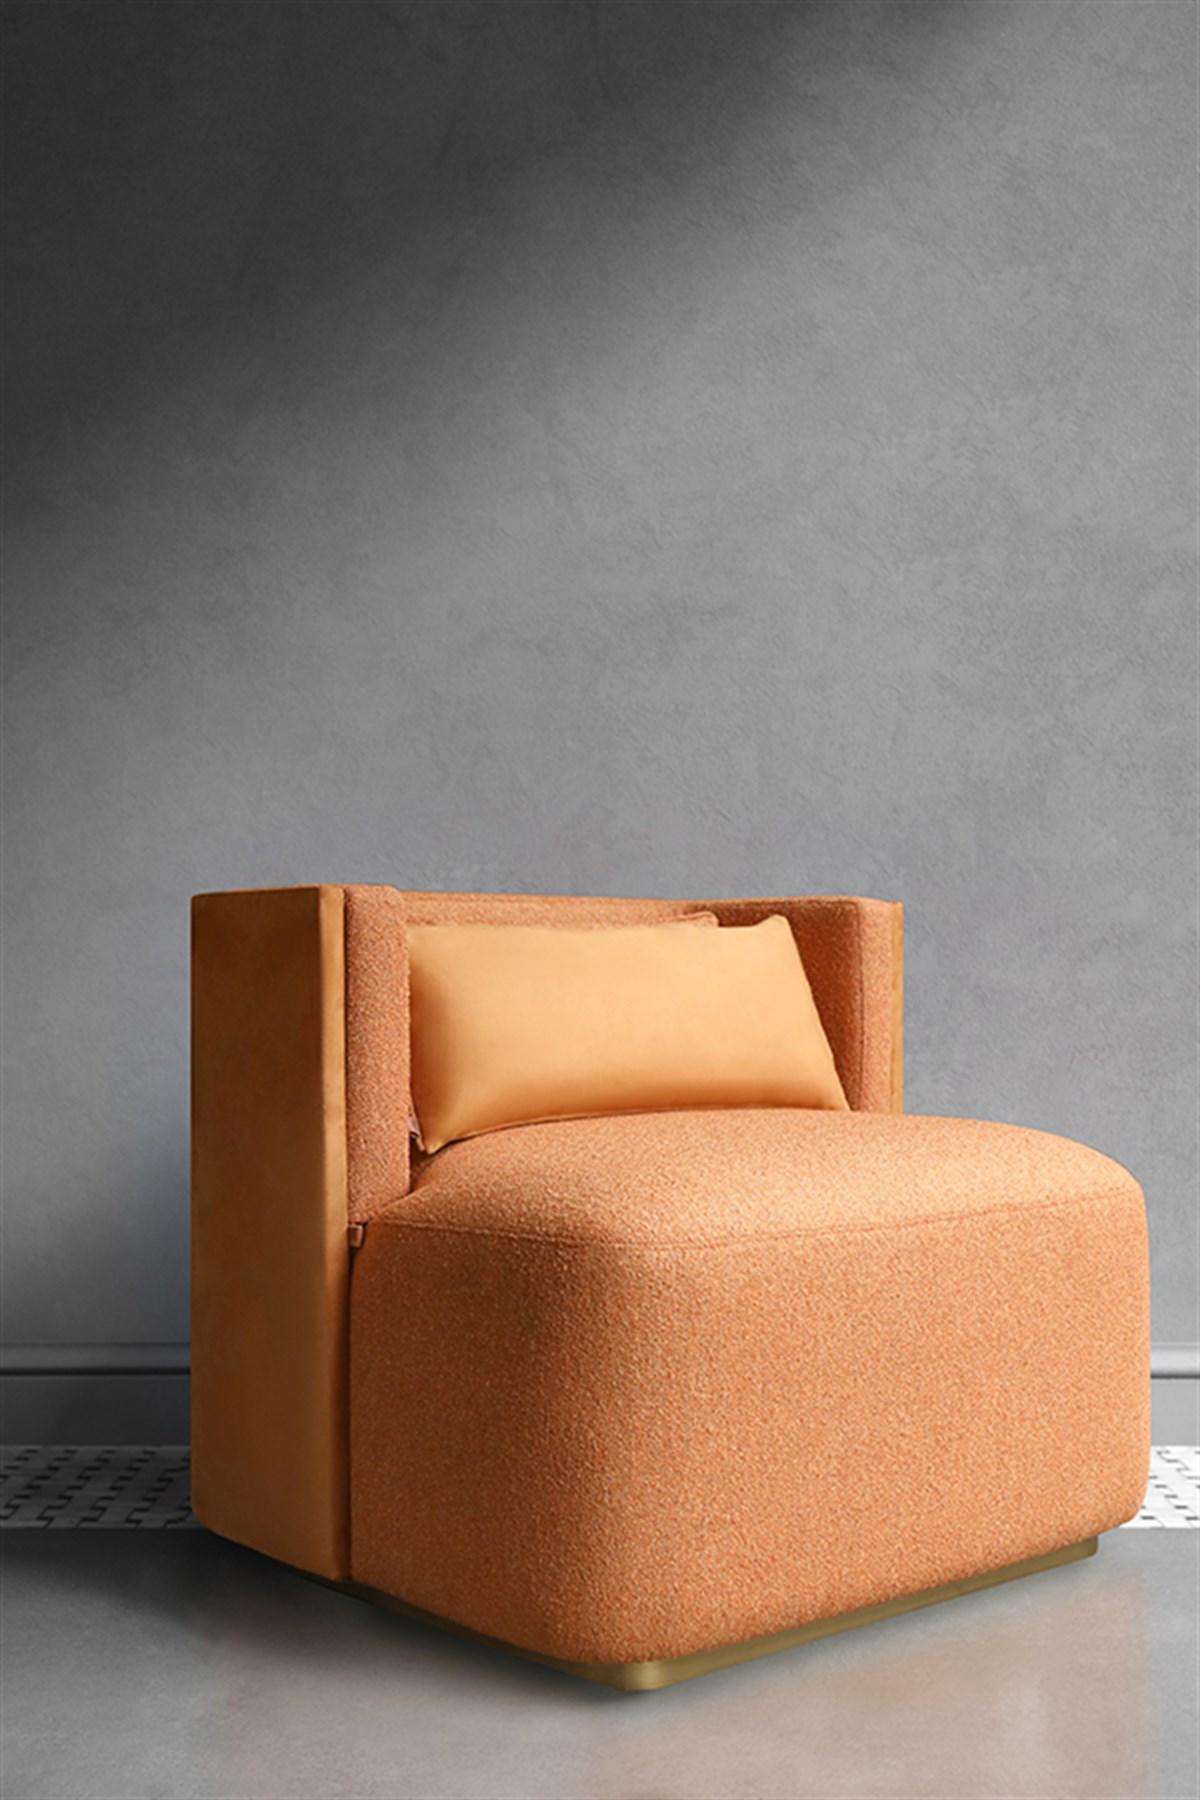 Papillonne Mustard armchair by Lagu
Designed by Ufuk Ceylan
Dimensions: W 80 x D 72 x H 73 cm
Materials: Bouclé, Foam, Hardwood, Metal, Upholstery.

The papillonne mustard armchair complements your style with its flawless form and unmatched comfort,